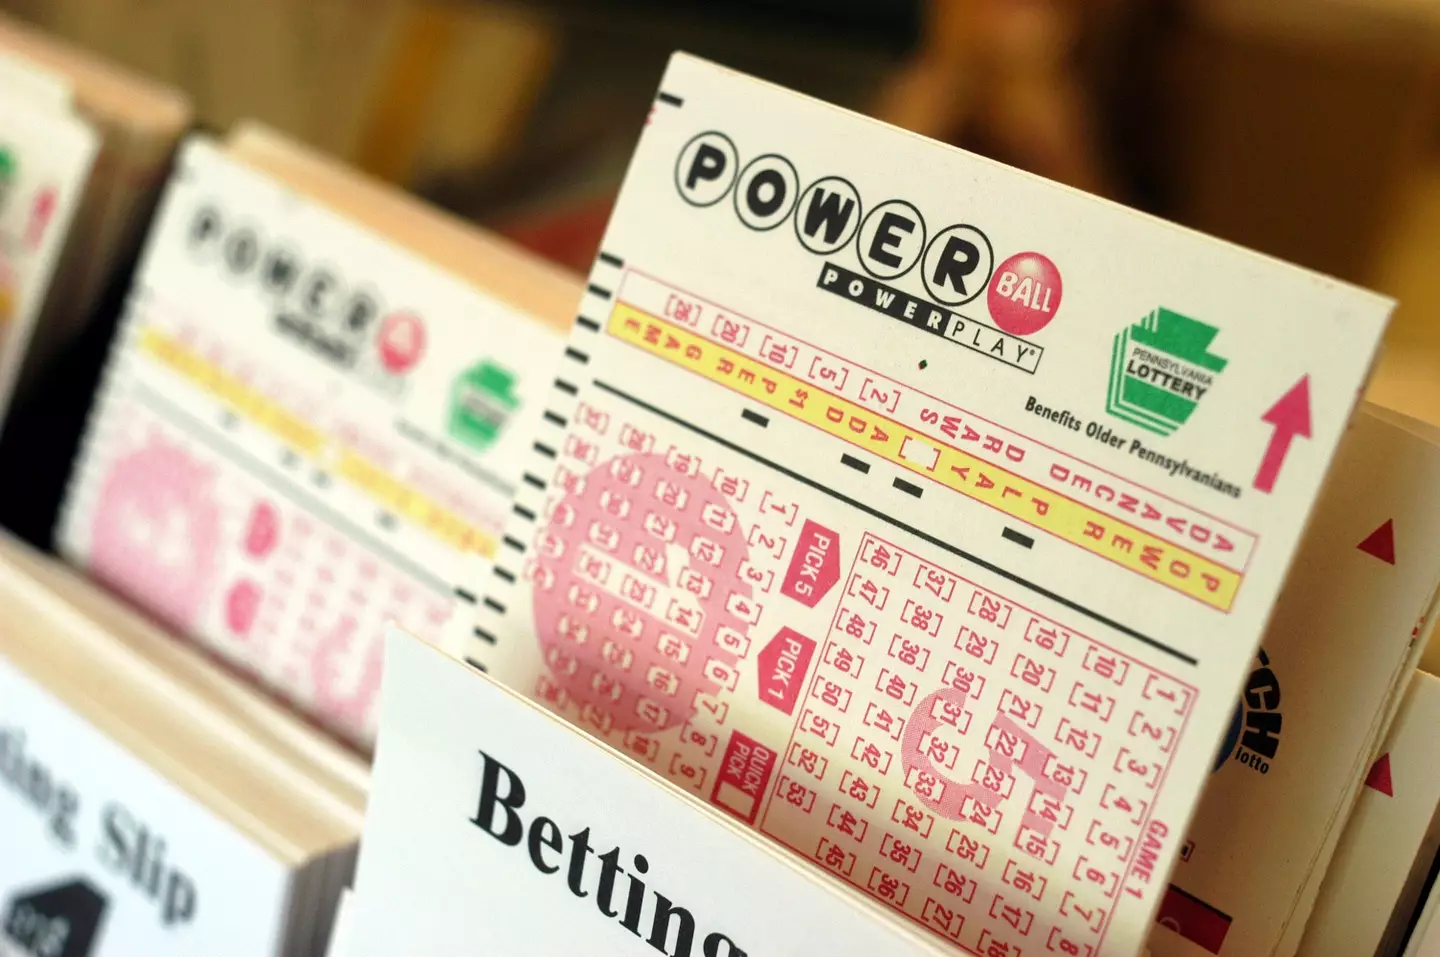 One lucky Australian woman has admitted she started slapping her face in shock after realizing she had a winning lottery ticket.